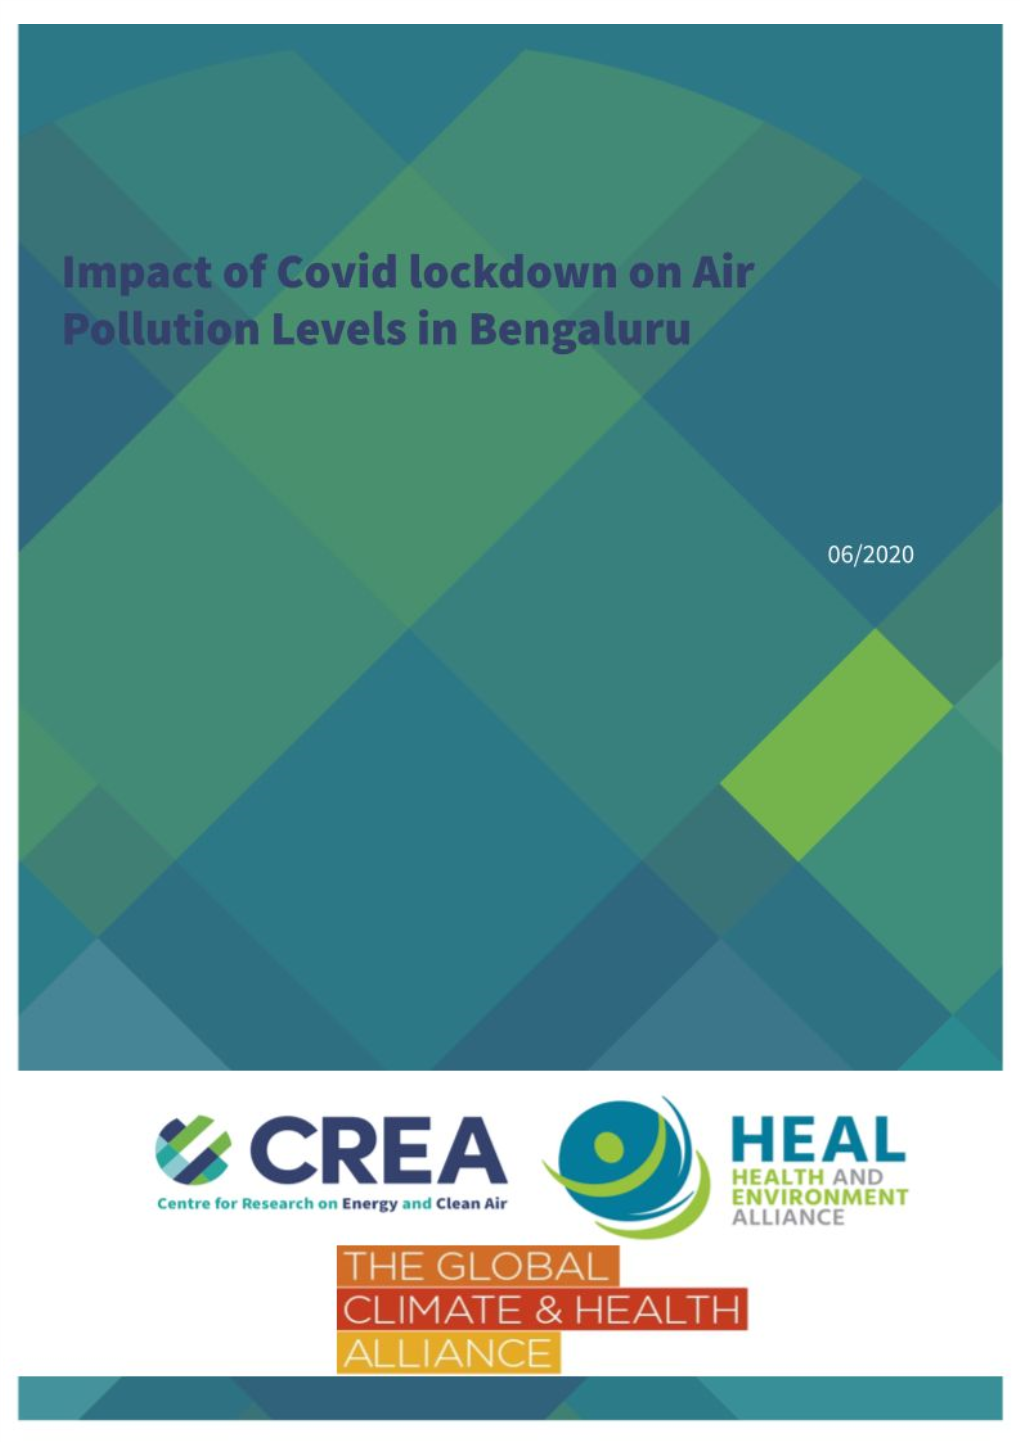 Impact of Covid Lockdown on Air Pollution Levels in Bengaluru